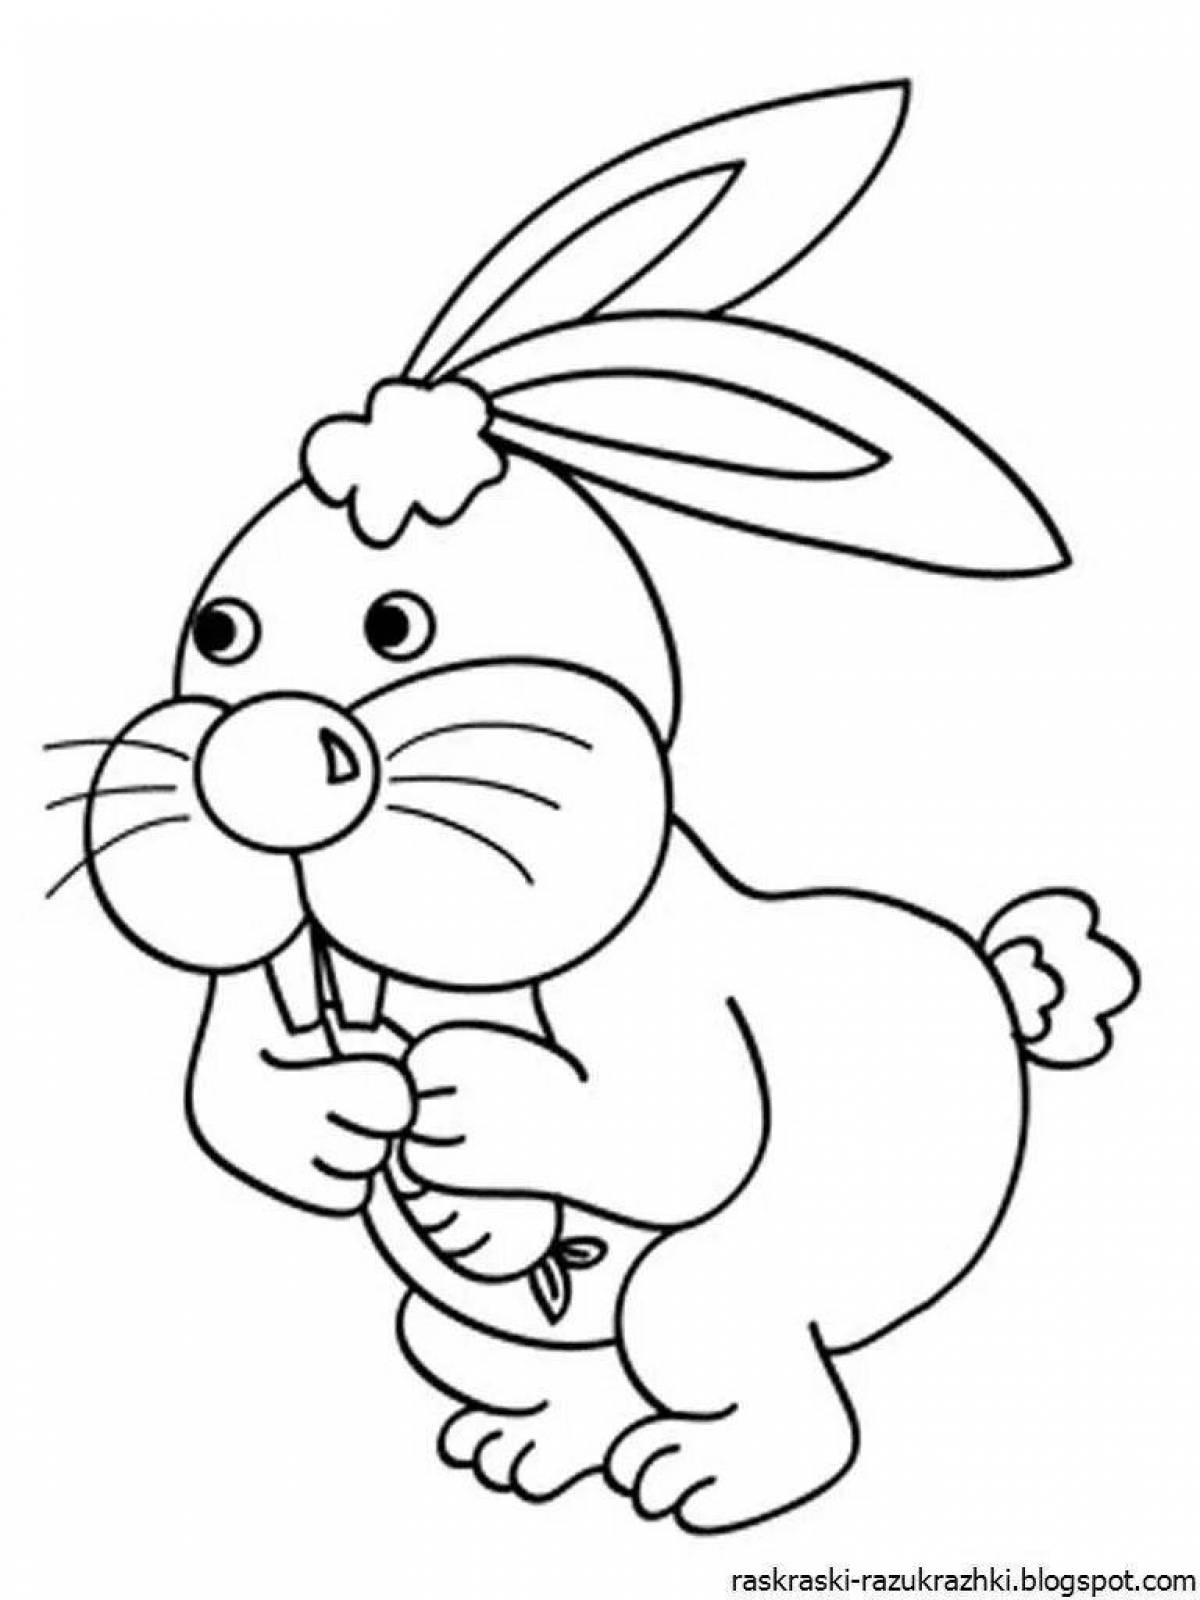 Fluffy bunny coloring book for kids